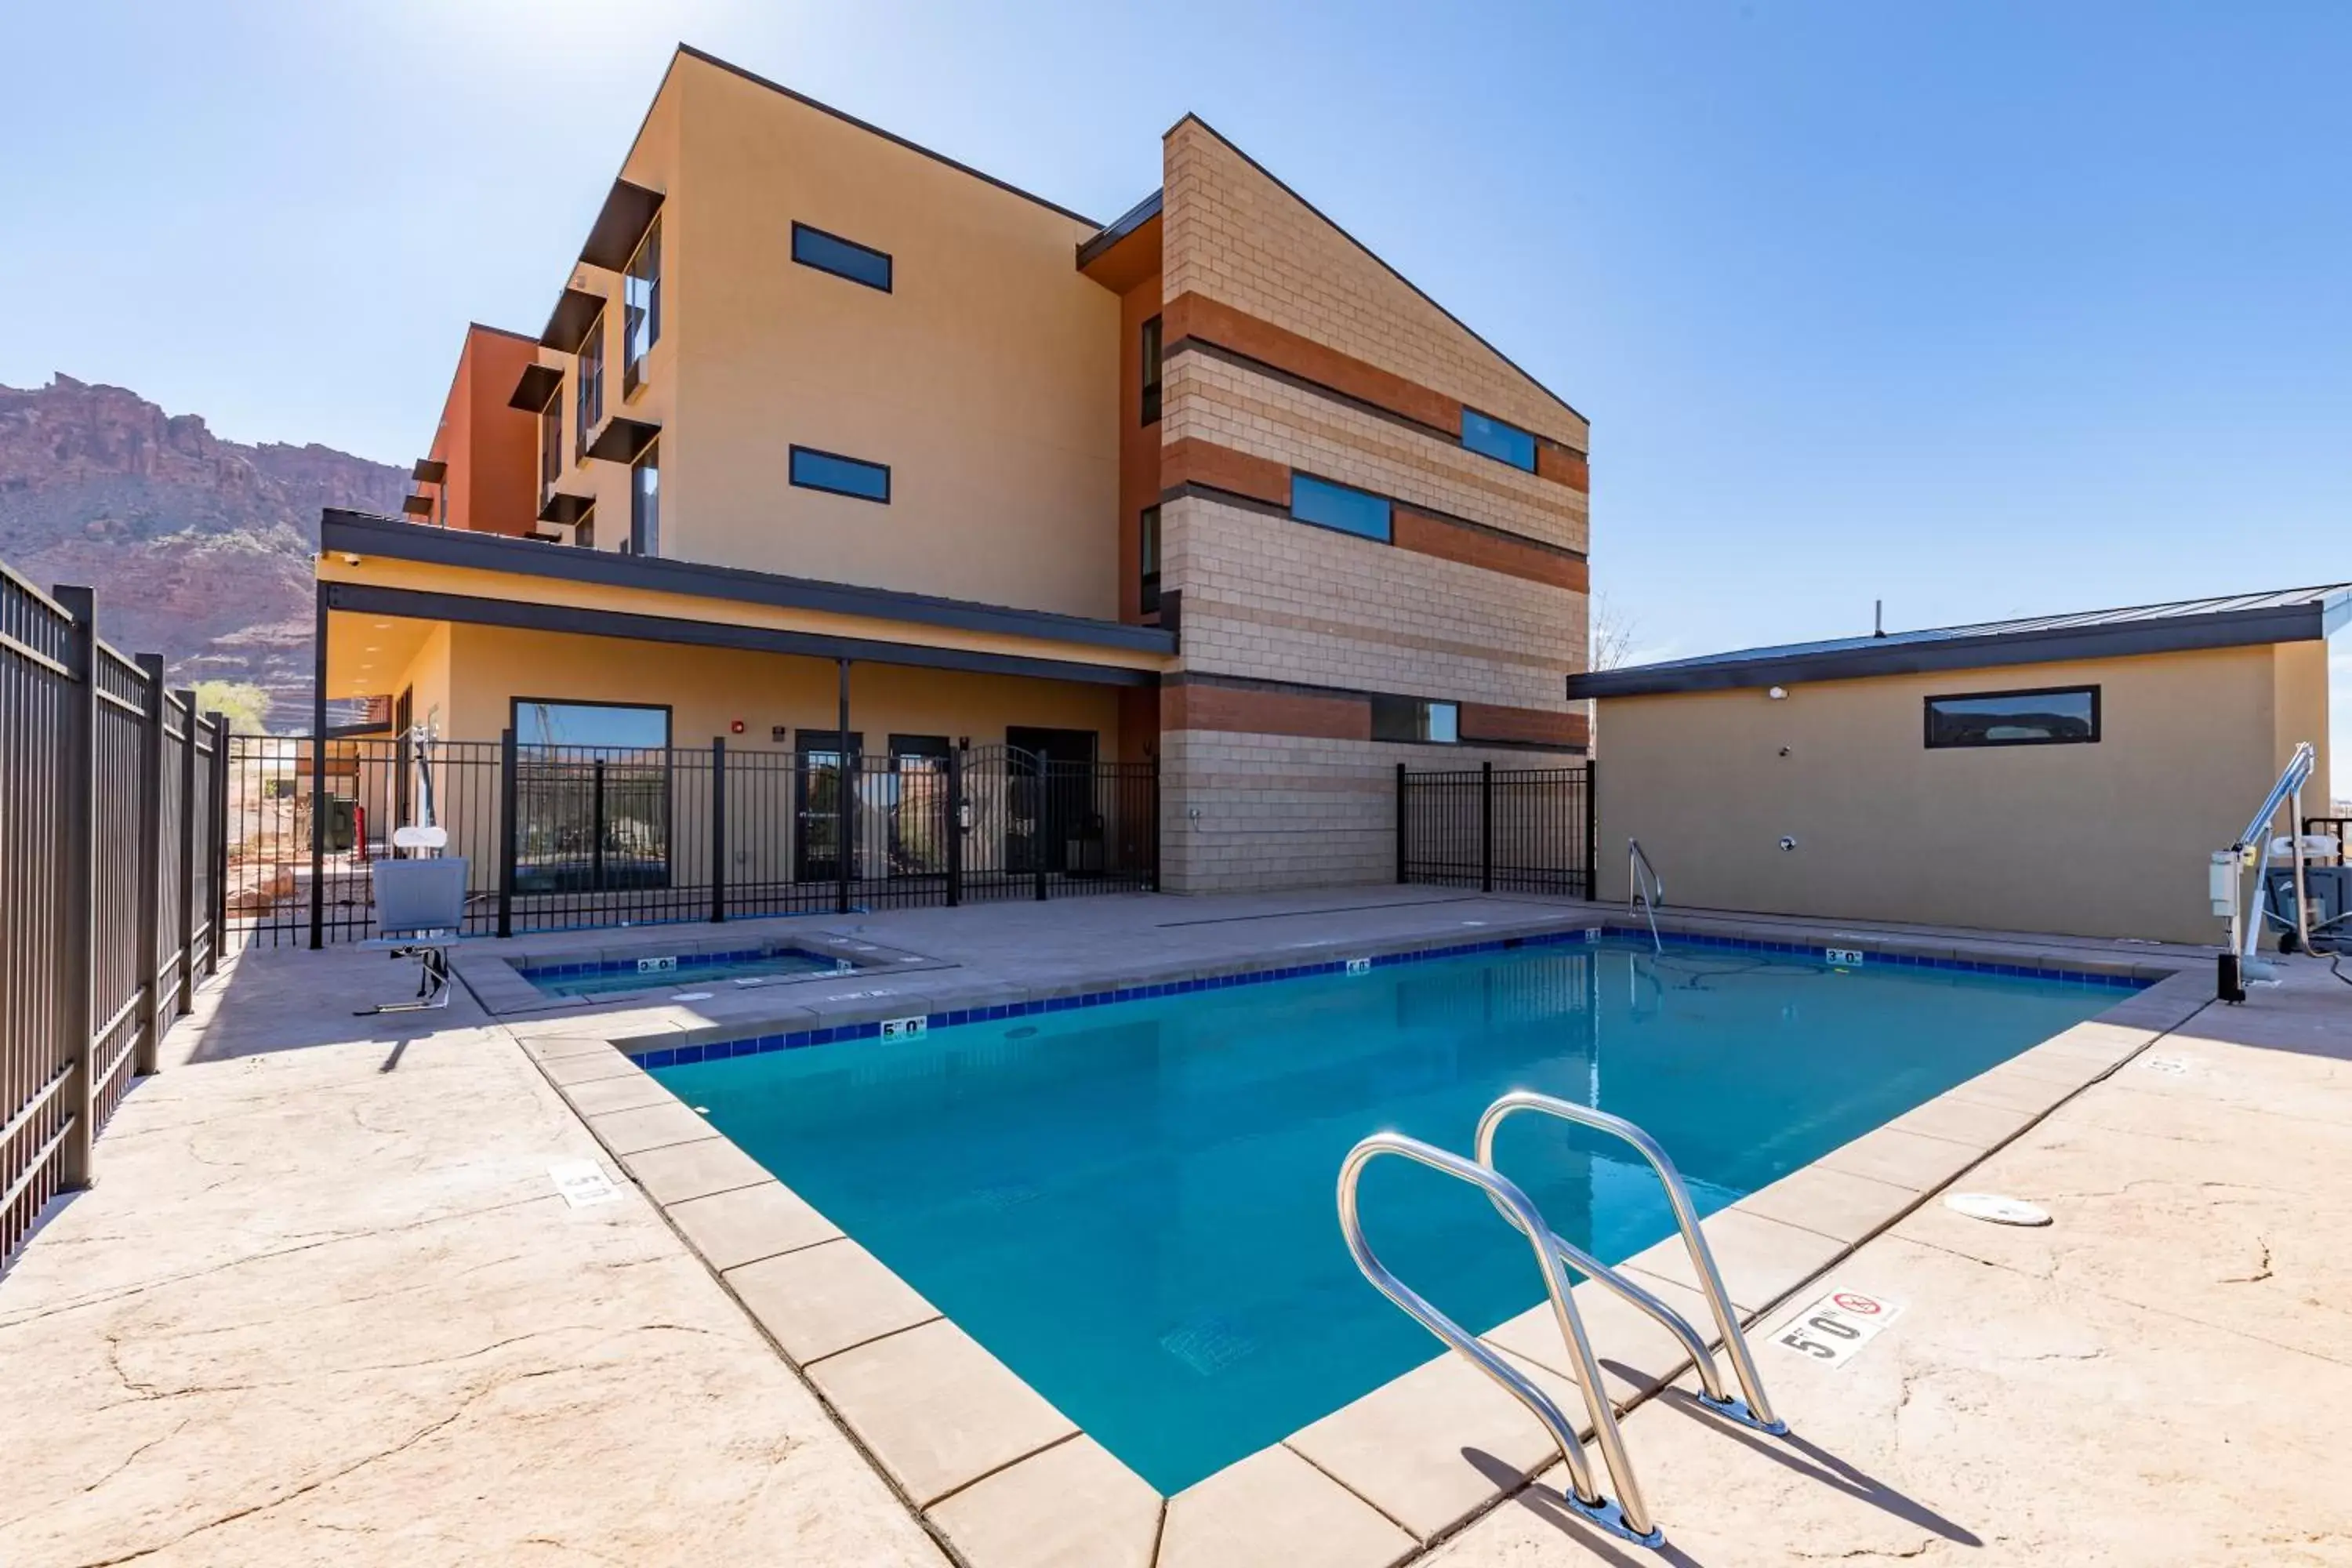 Swimming pool, Property Building in Scenic View Inn & Suites Moab